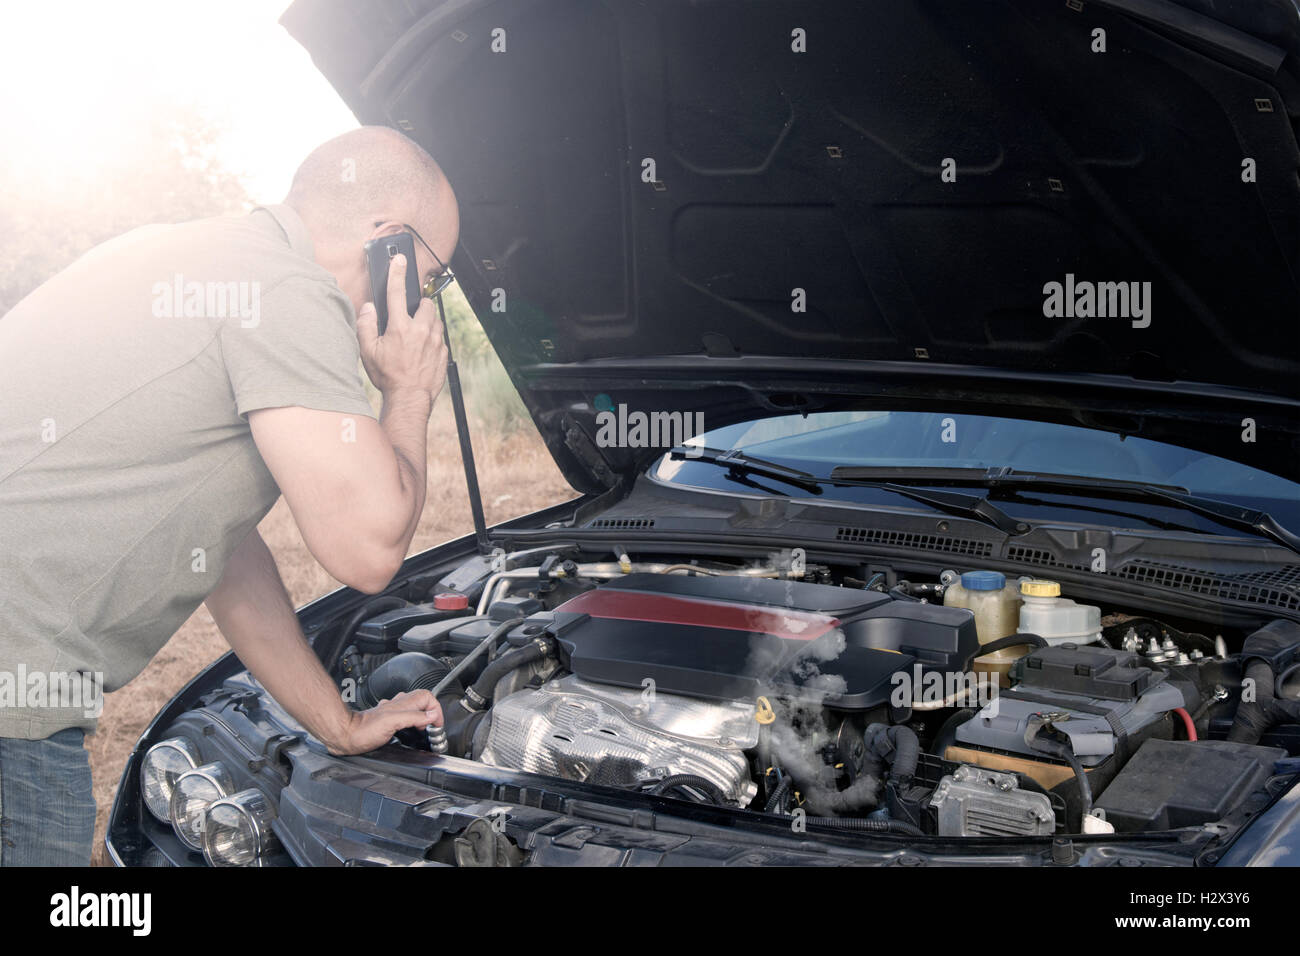 Close up of a broken down car, engine open and smoking, in a rural area and the driver looking at the engine Stock Photo